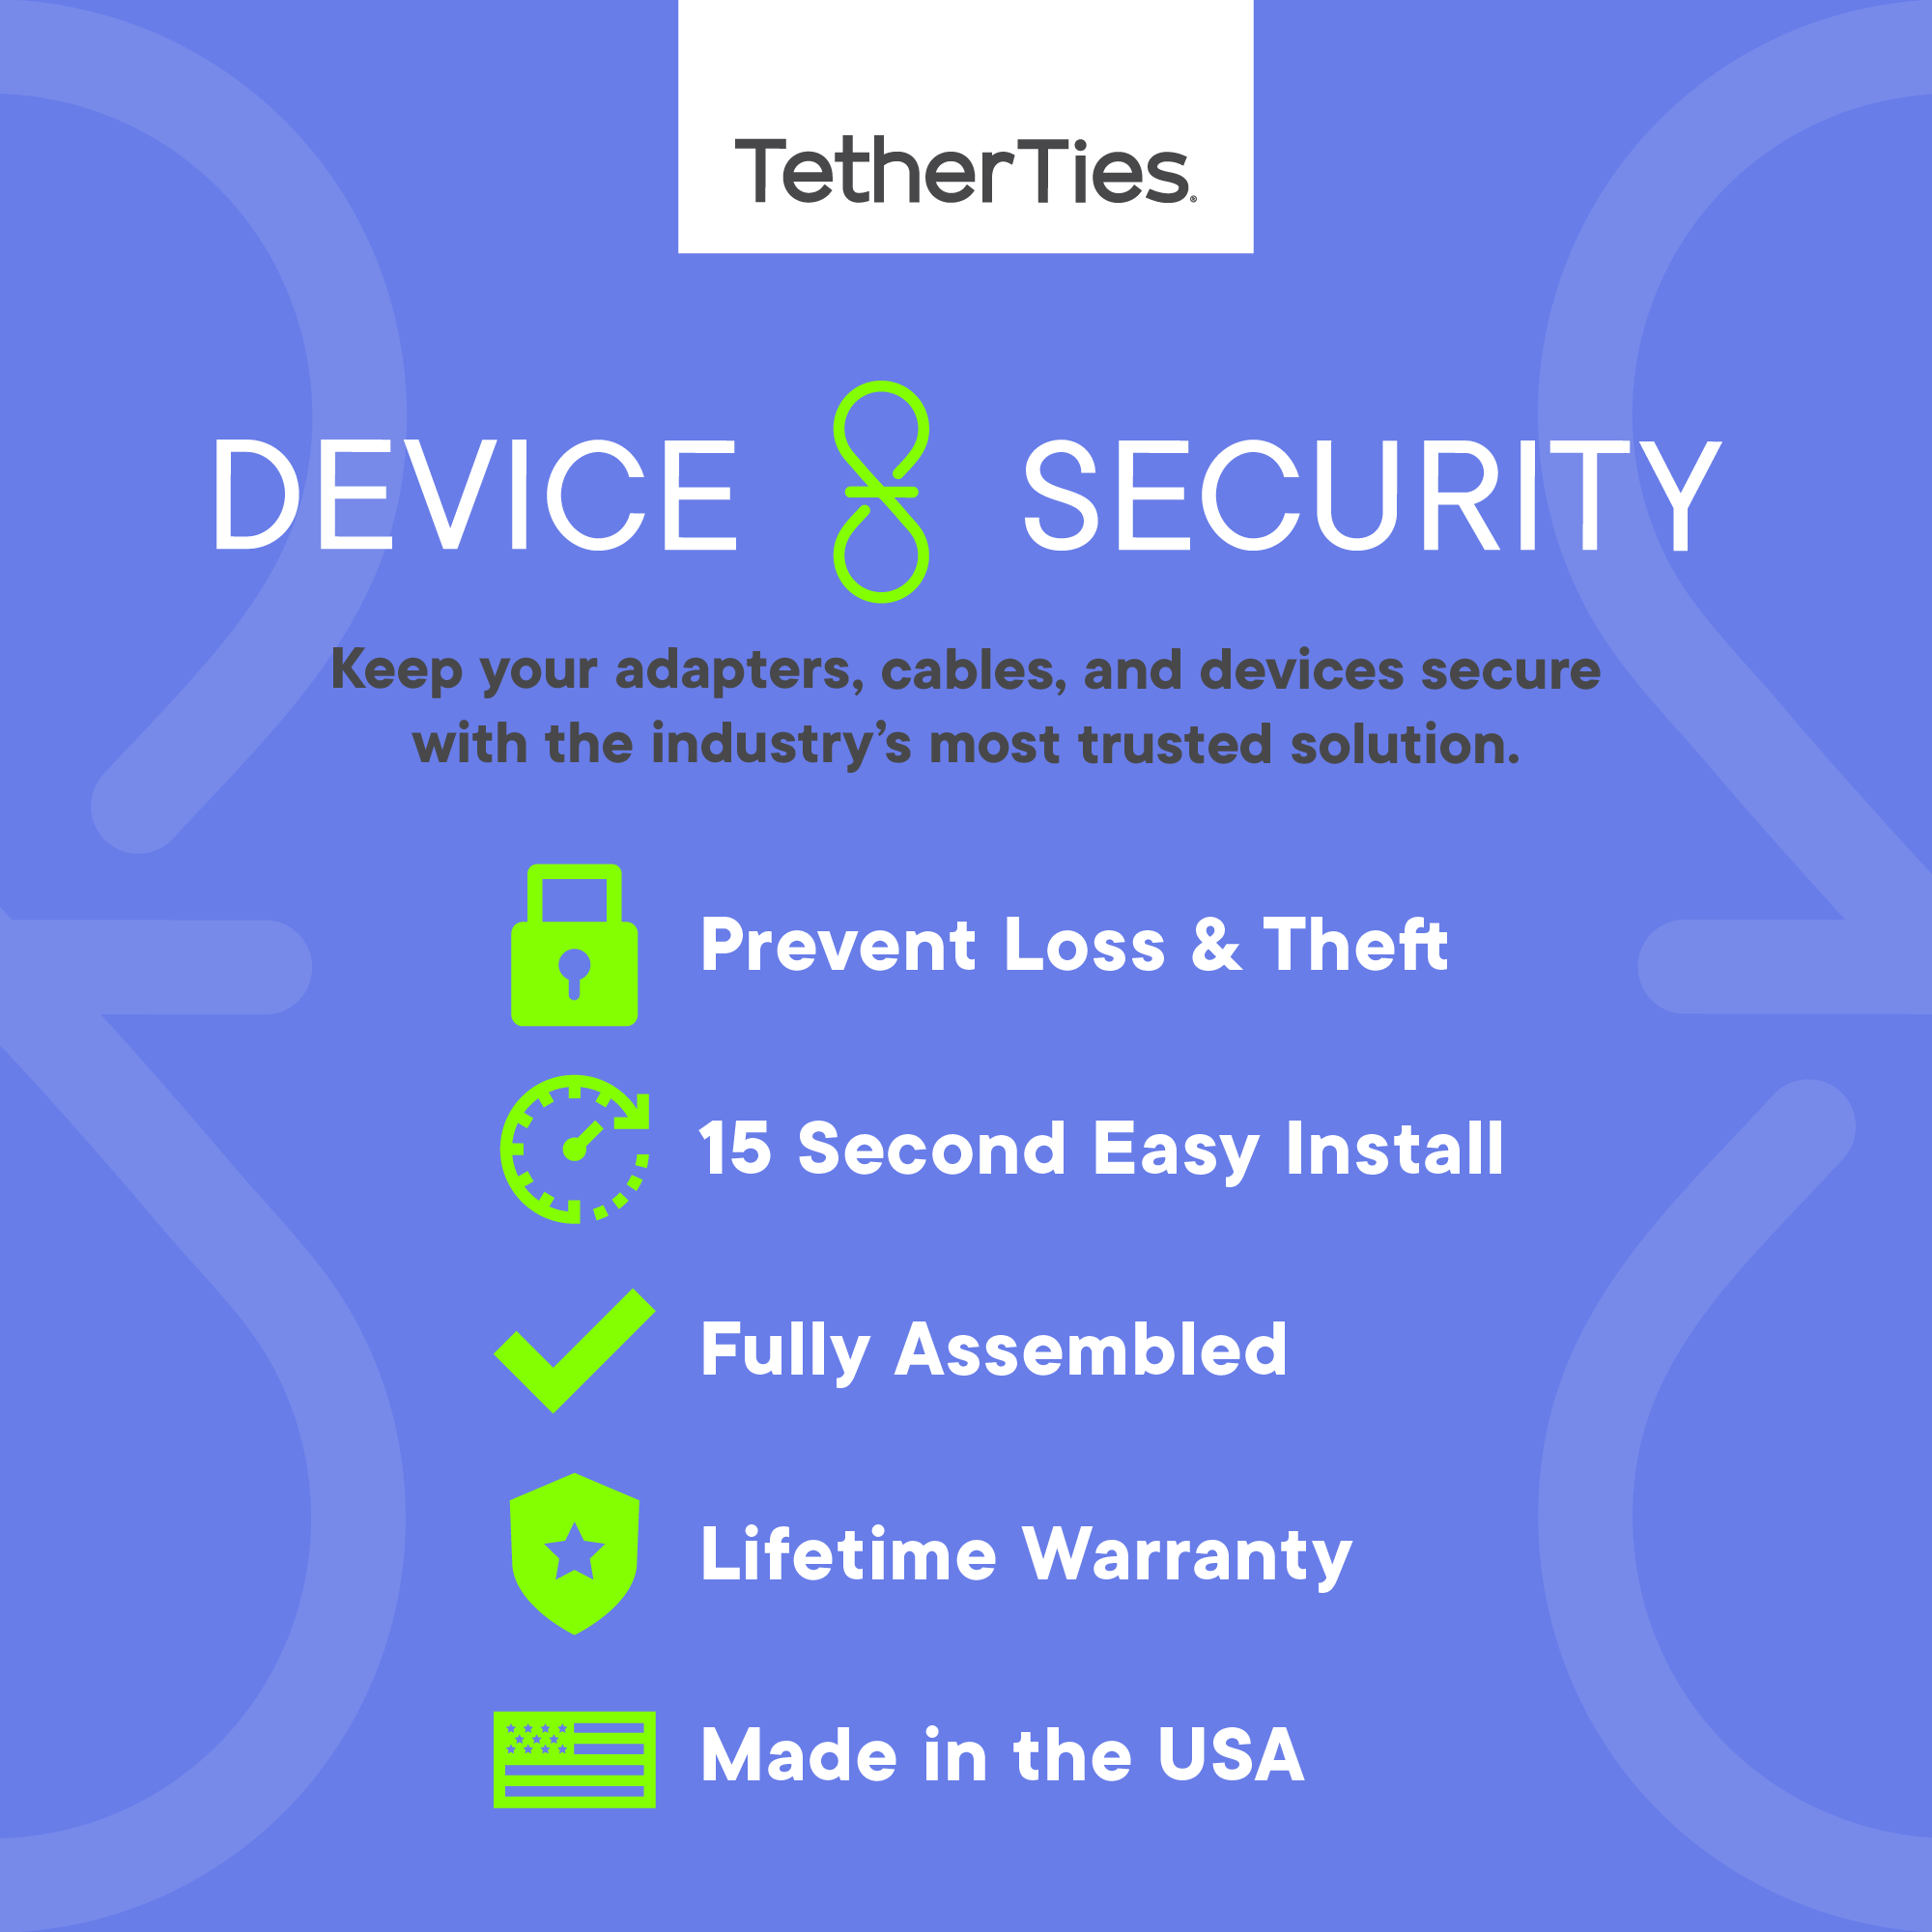 Stop Thieves from Stealing Your Devices Tether Computer adapters and dongles Secure Cables Lock Down Computer peripherals Multi Device Cable Trap The Cord Stryker tampered-Resistant